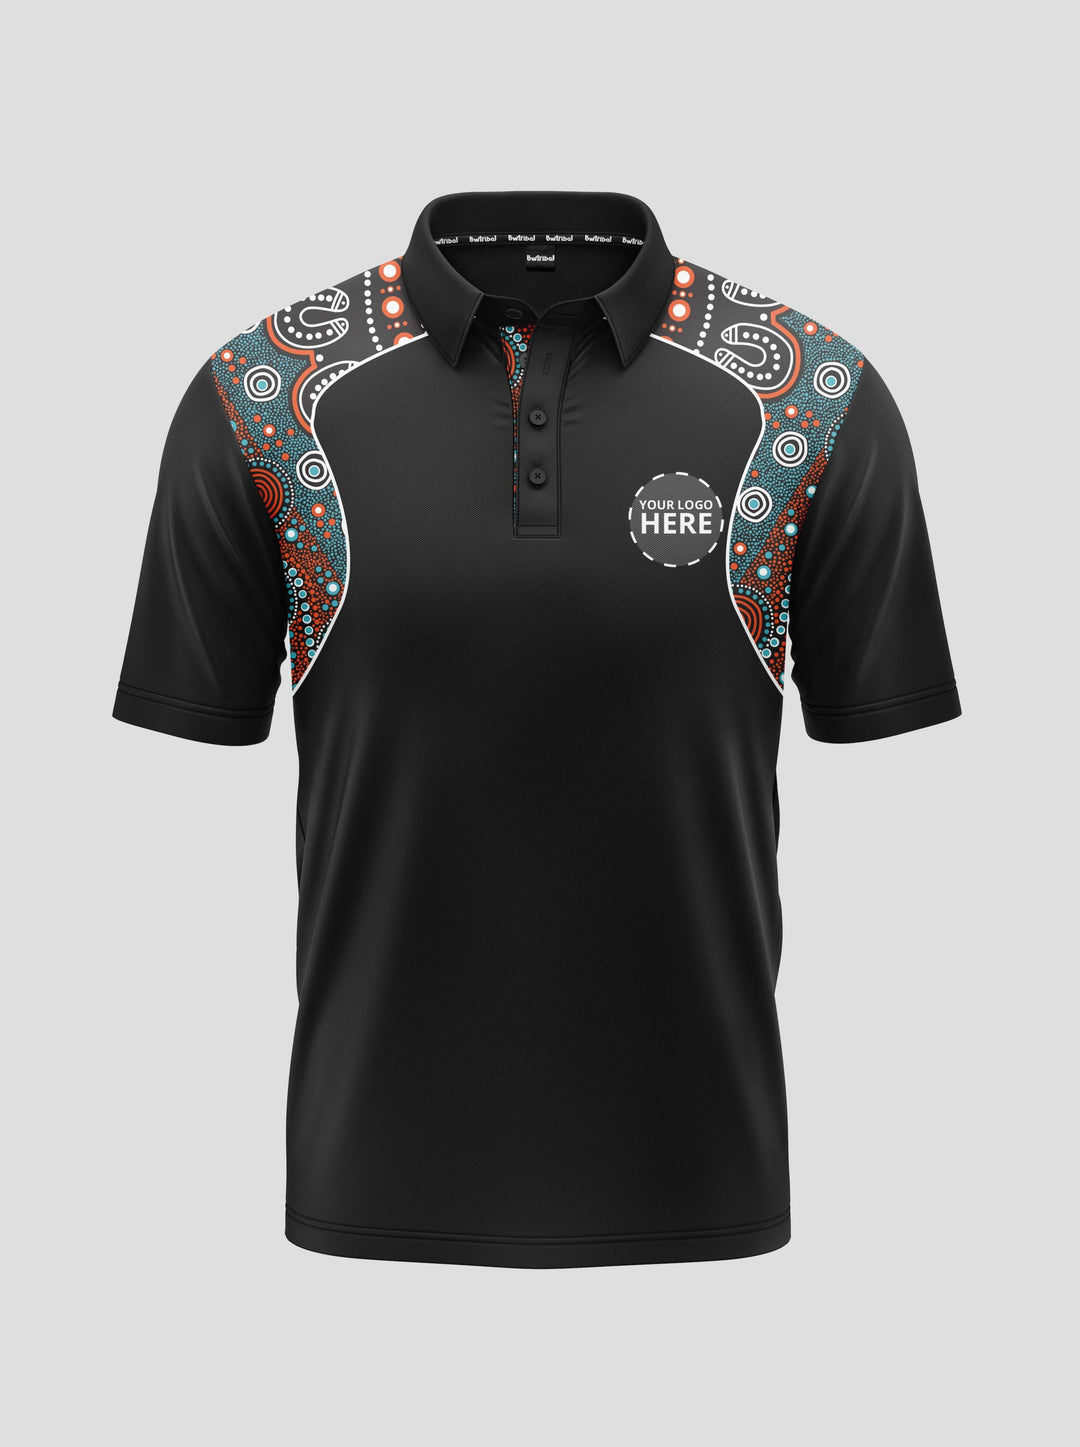 Family Place - Men's Corporate Polo